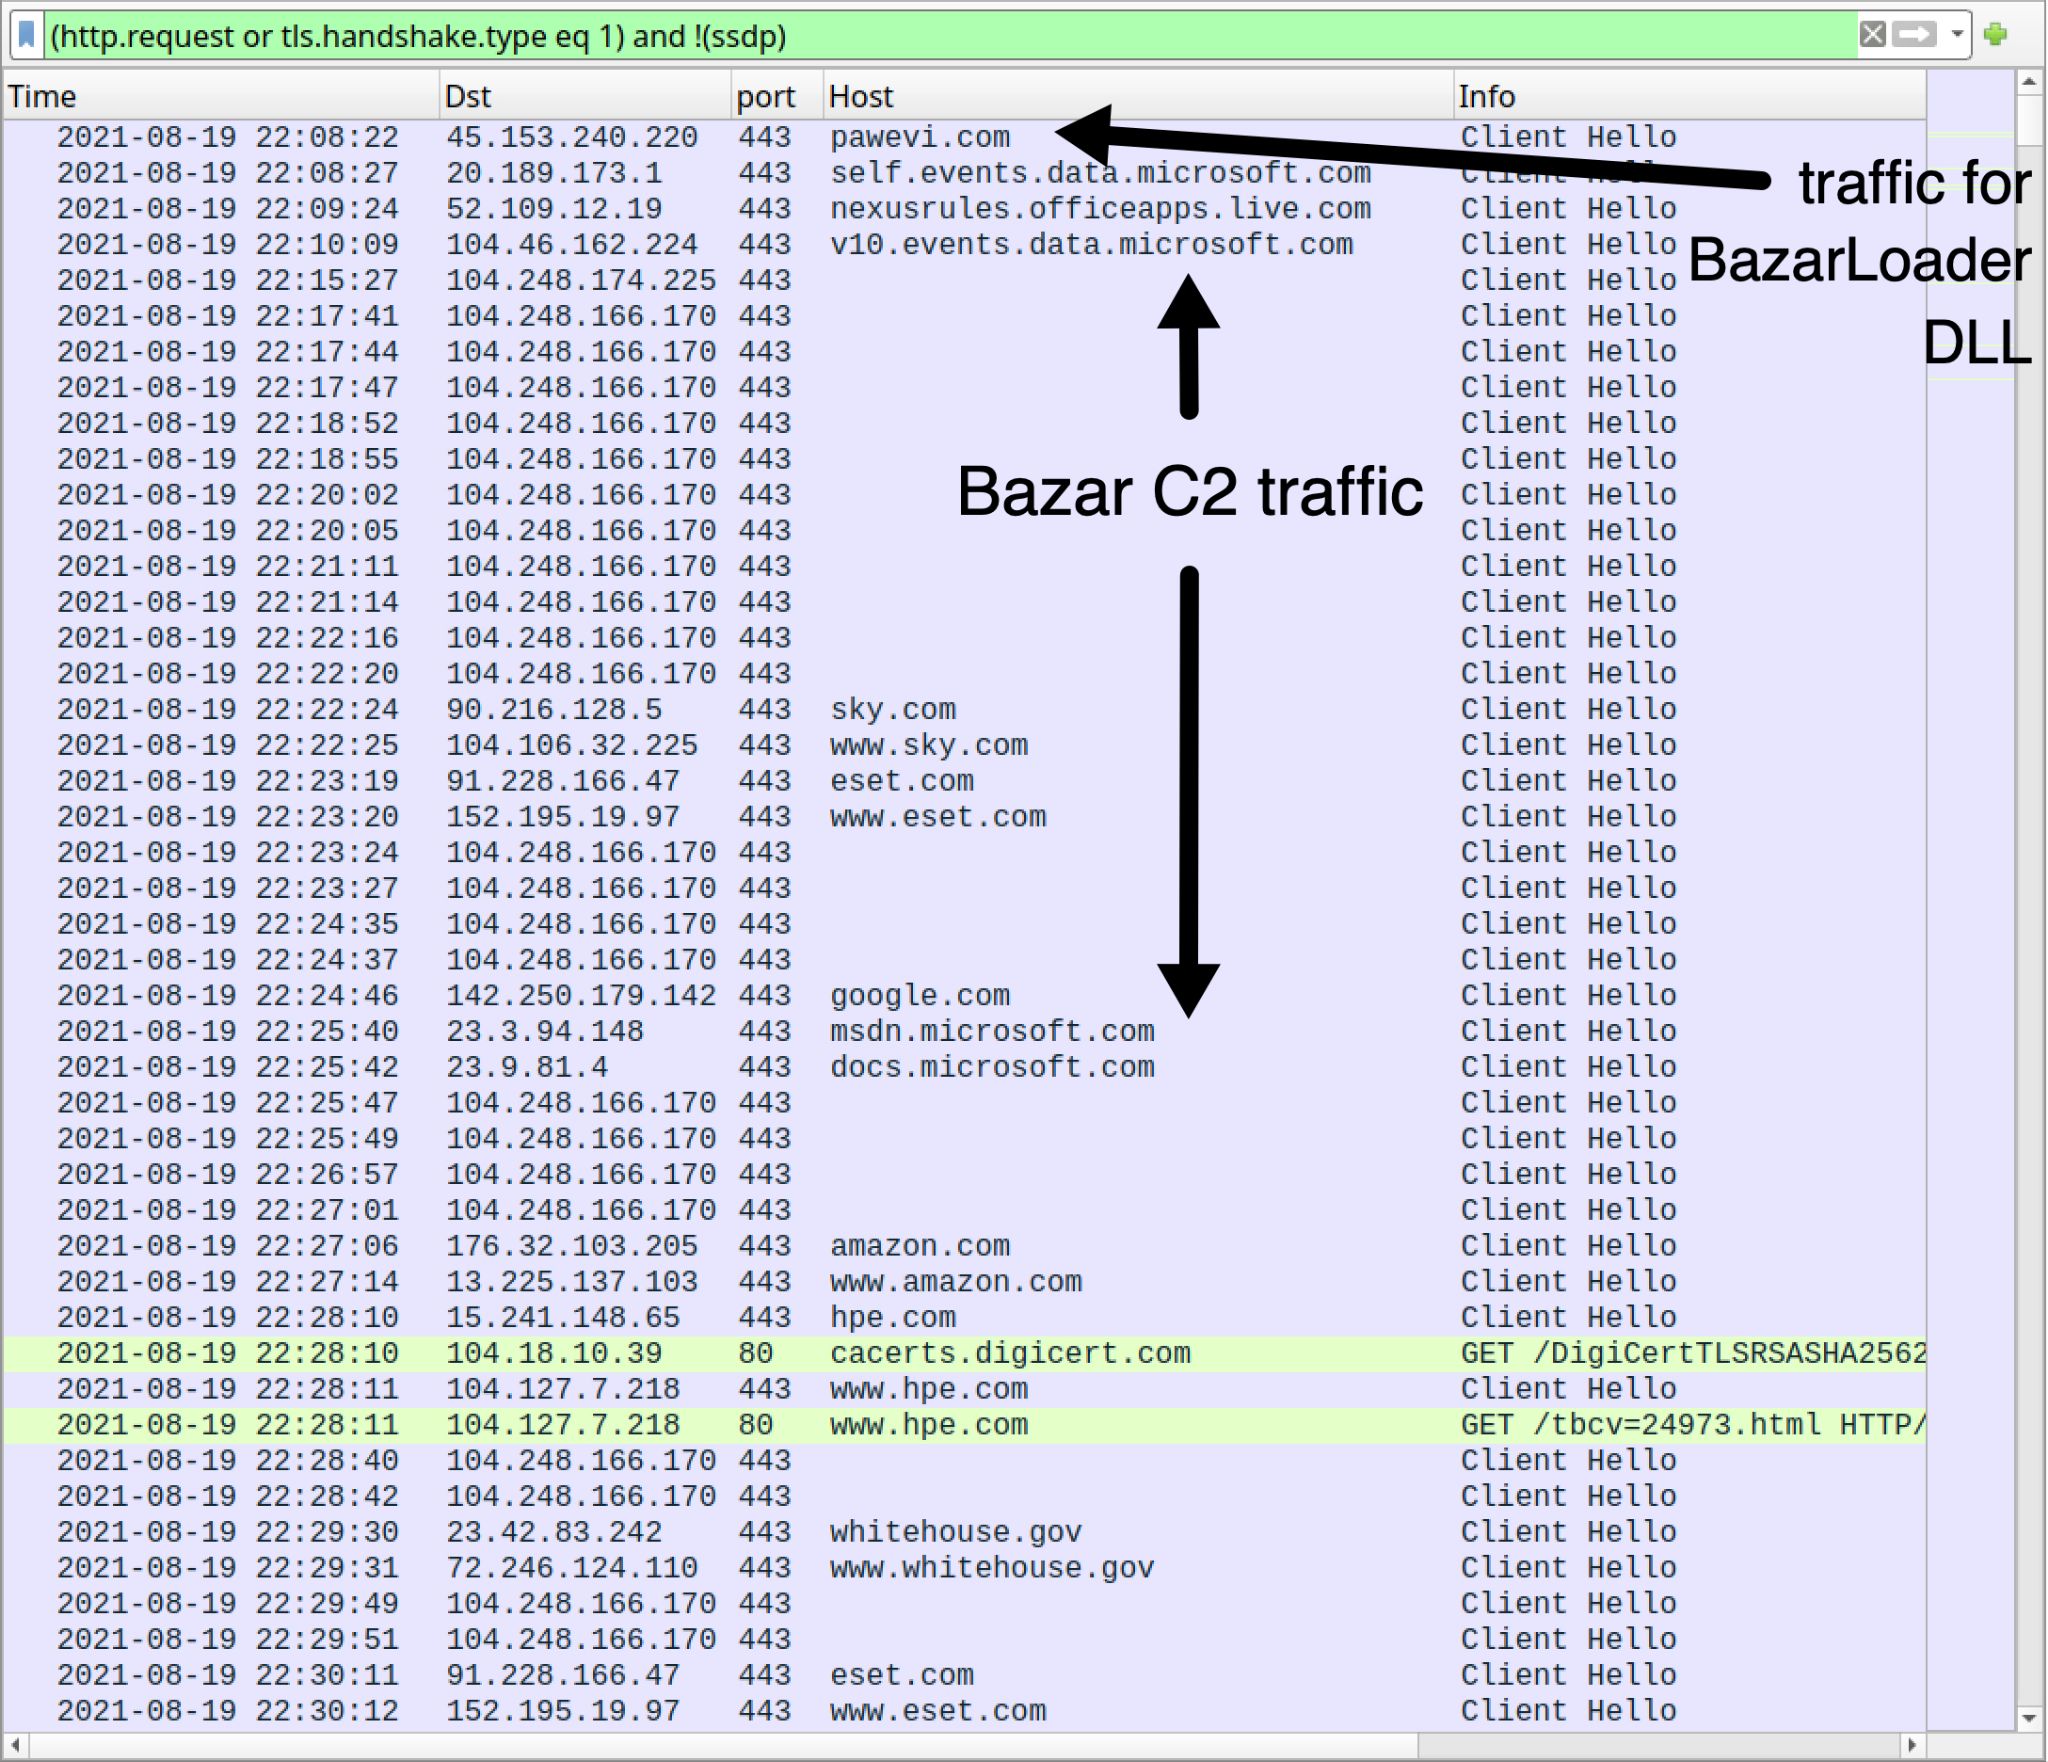 Traffic from the BazarLoader infection filtered in Wireshark. One black arrow indicates the section that represents Bazar C2 traffic. Another arrow indicates traffic for BazarLoader DLL. 